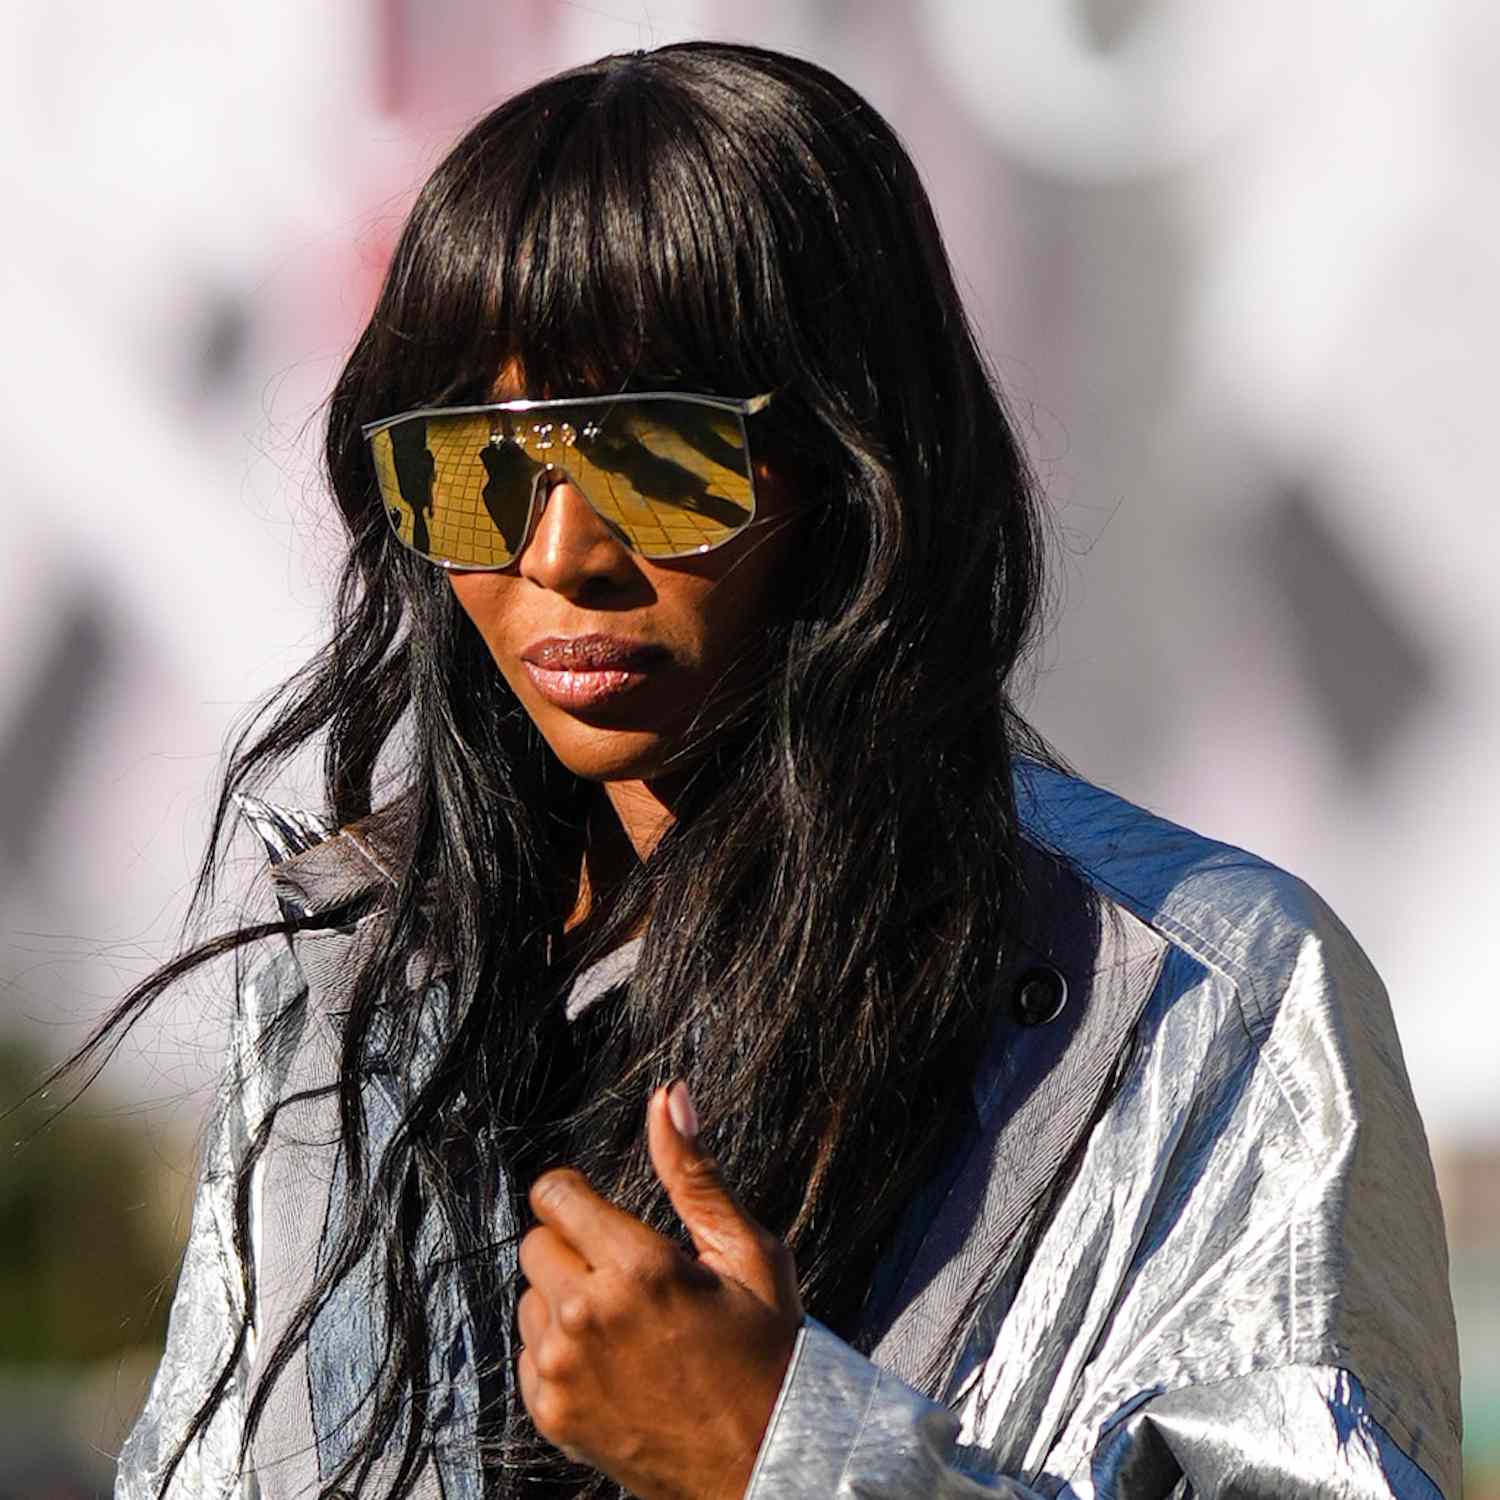 Naomi Campbell wears a tousled wavy hairstyle with bangs and aviator sunglasses